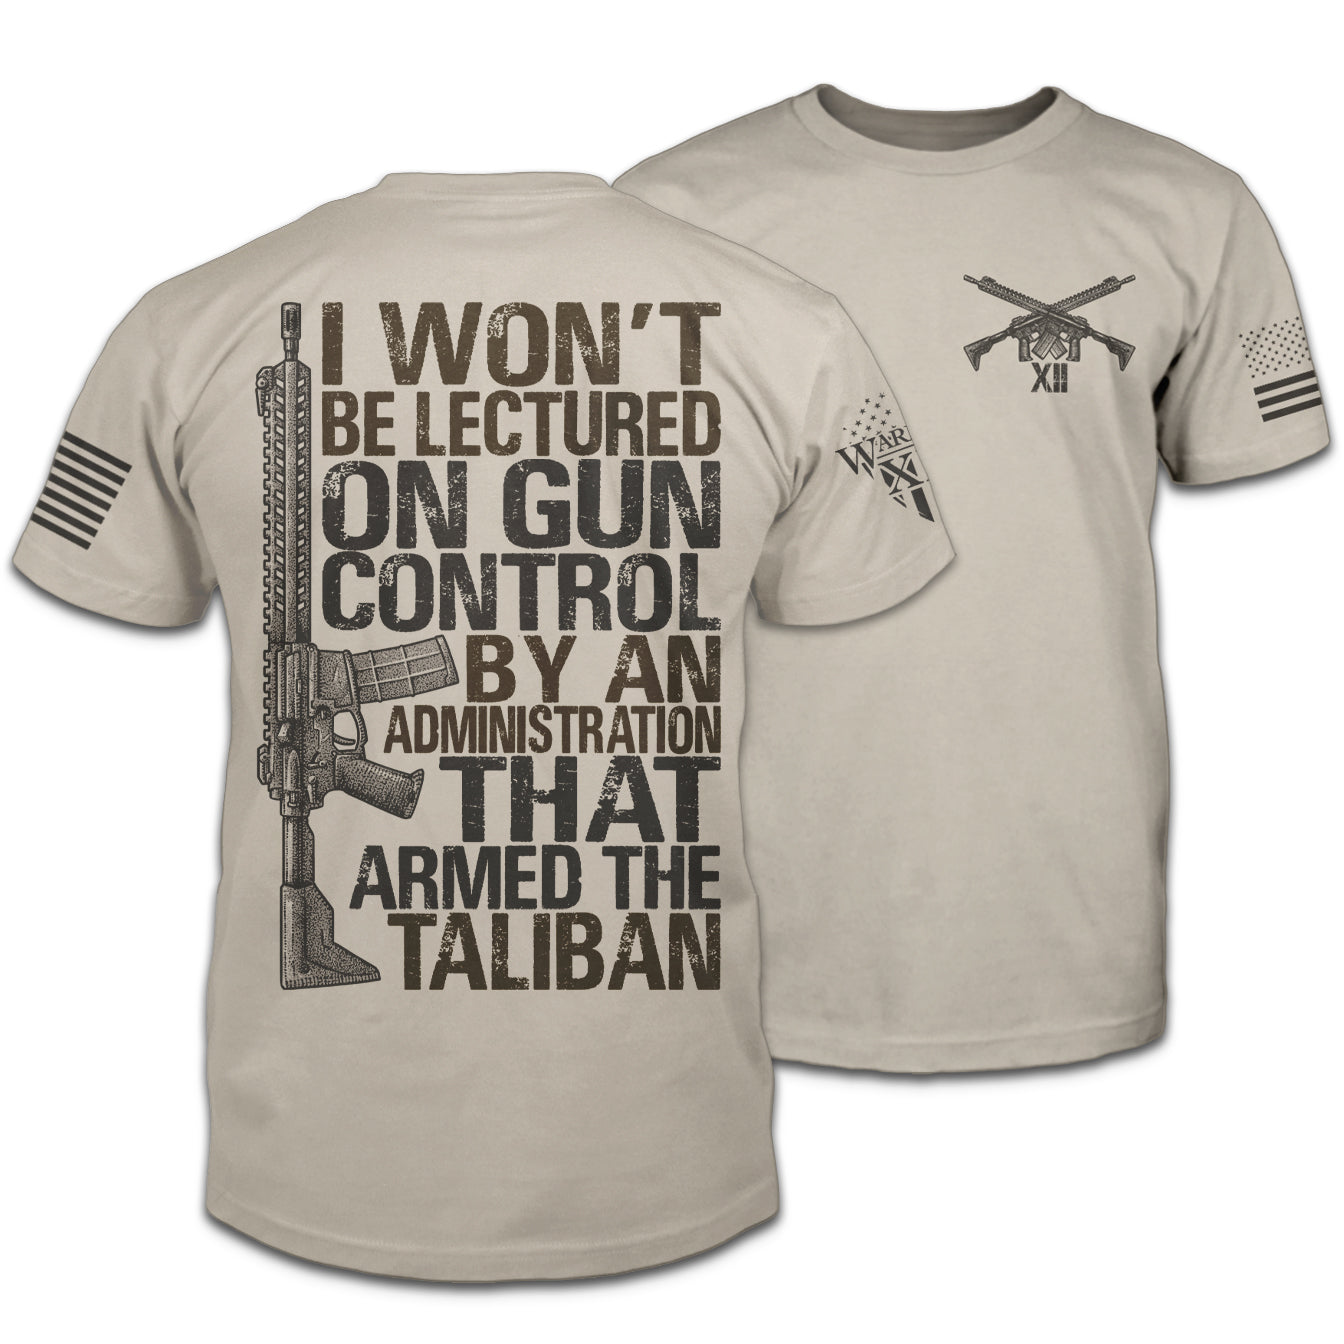 Front & back light tan t-shirt with the words 'I won't be lectured on gun control by an administration that armed the Taliban" with an AR15 printed on the shirt.